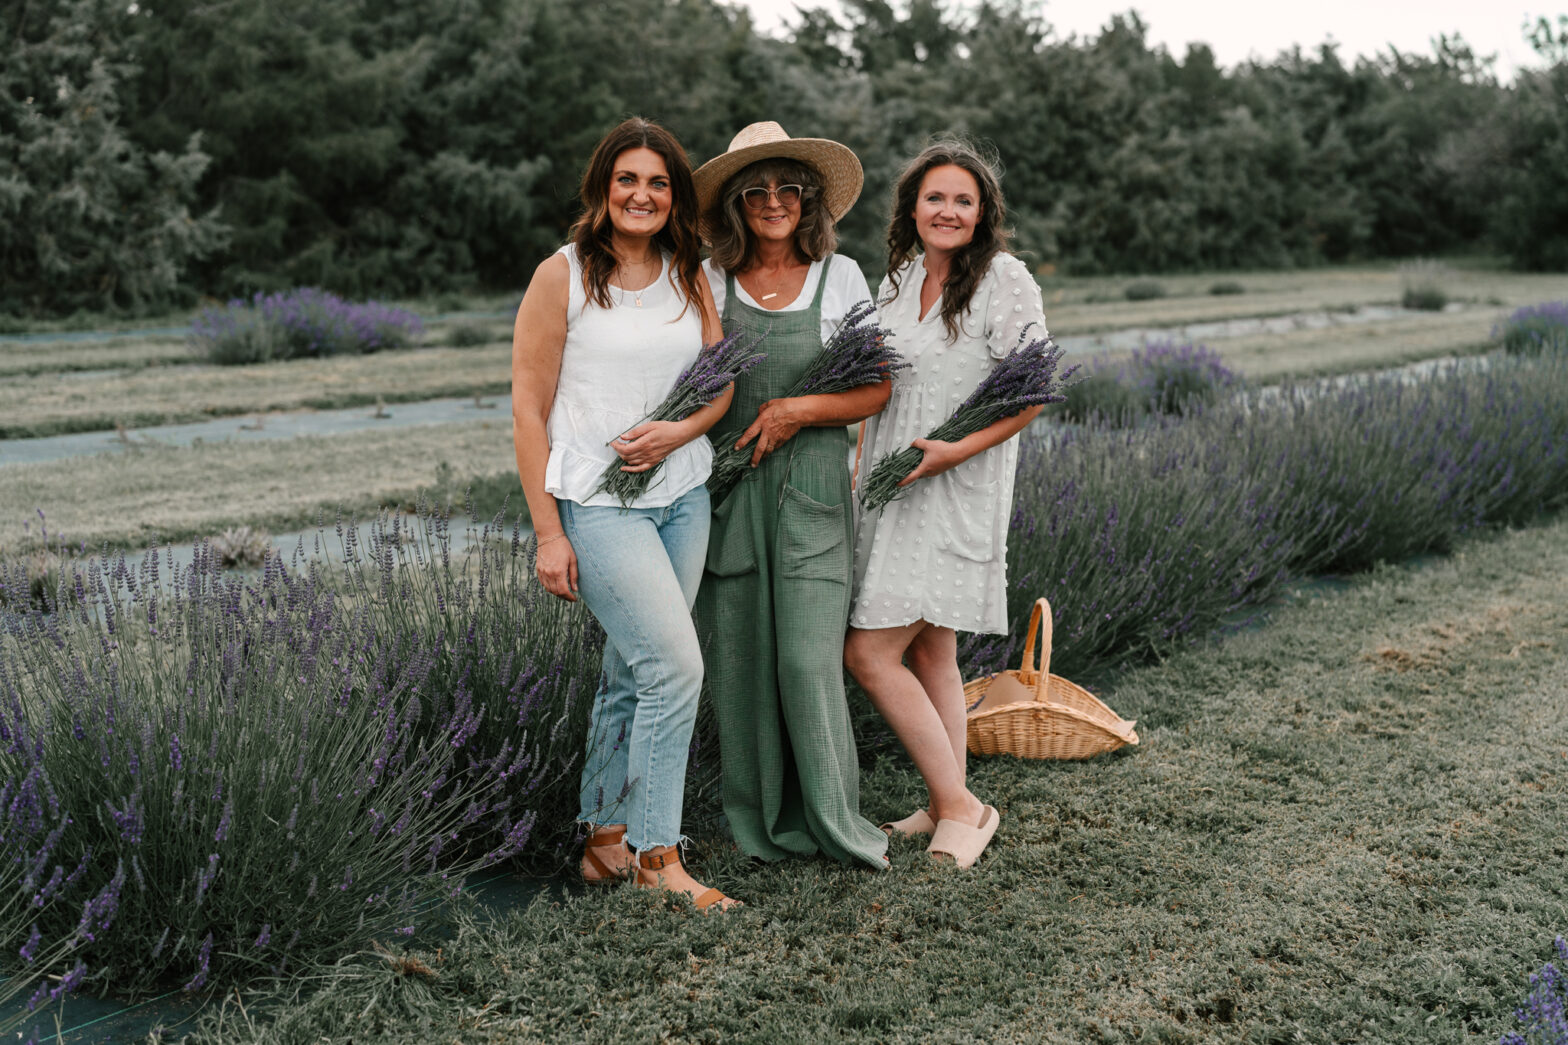 Our Lavender Co. Owners pose in field with Lavender